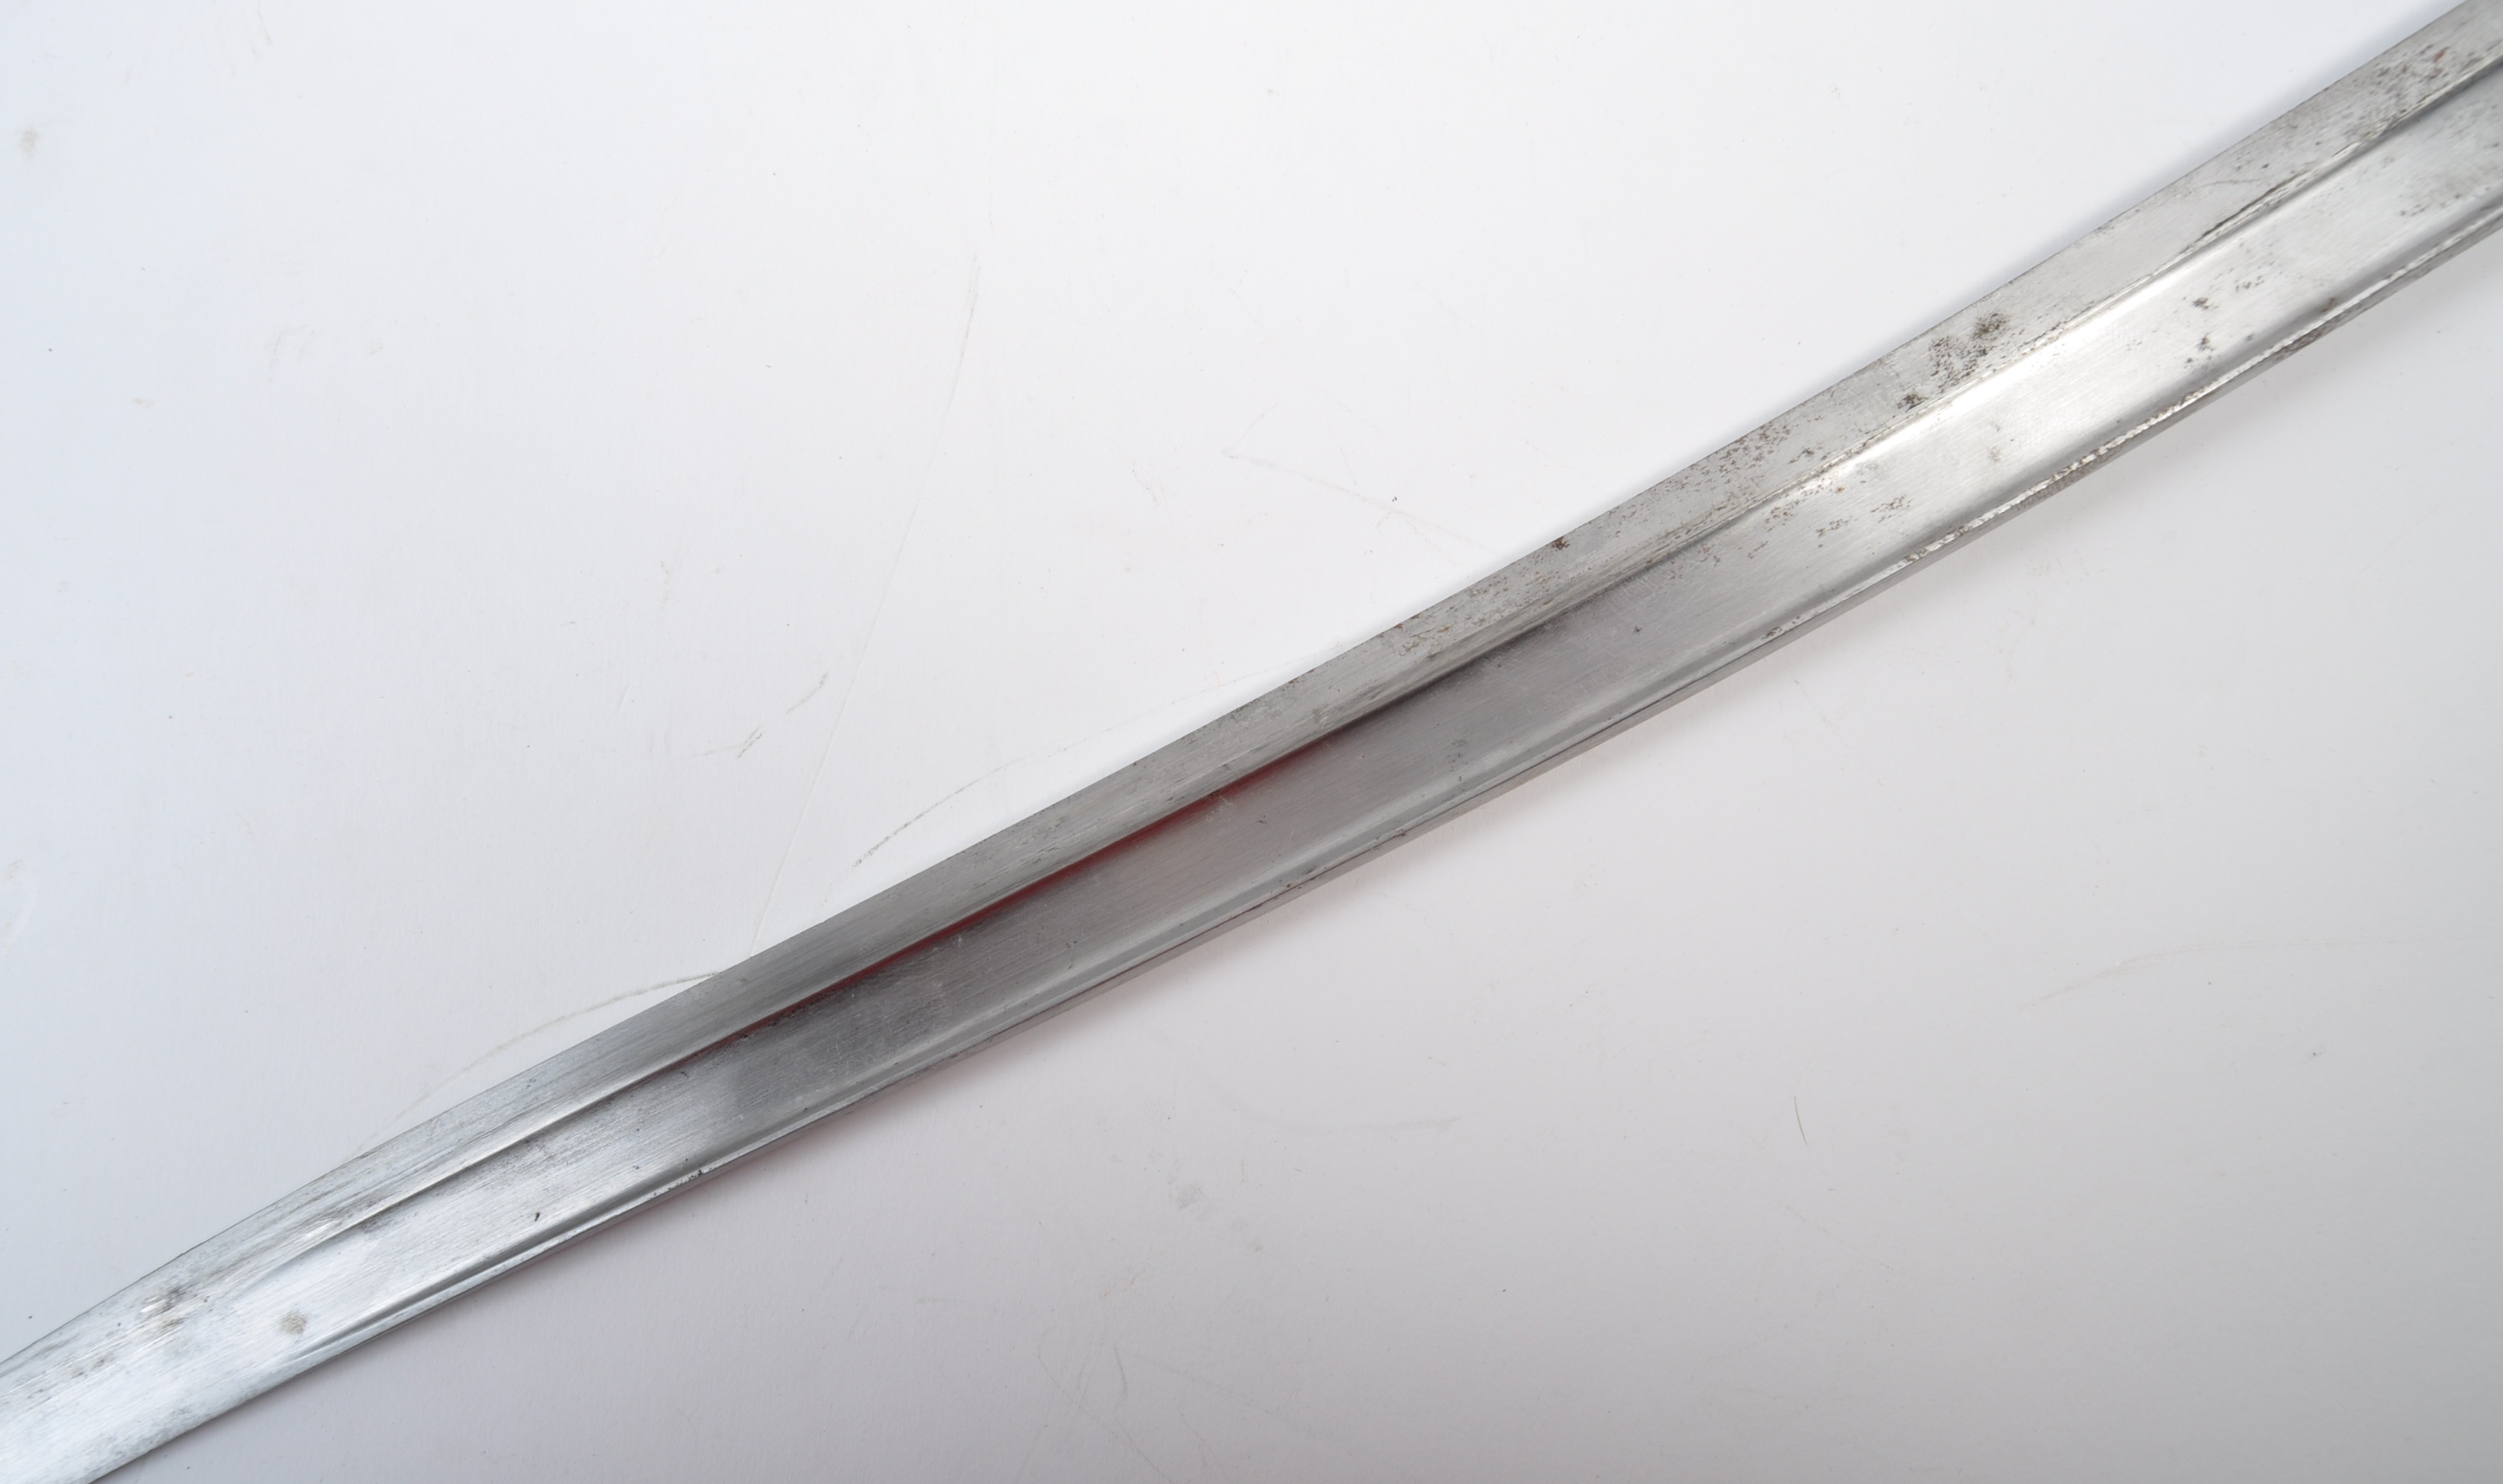 19TH CENTURY ANTIQUE FRENCH SWORD BAYONET - Image 5 of 7